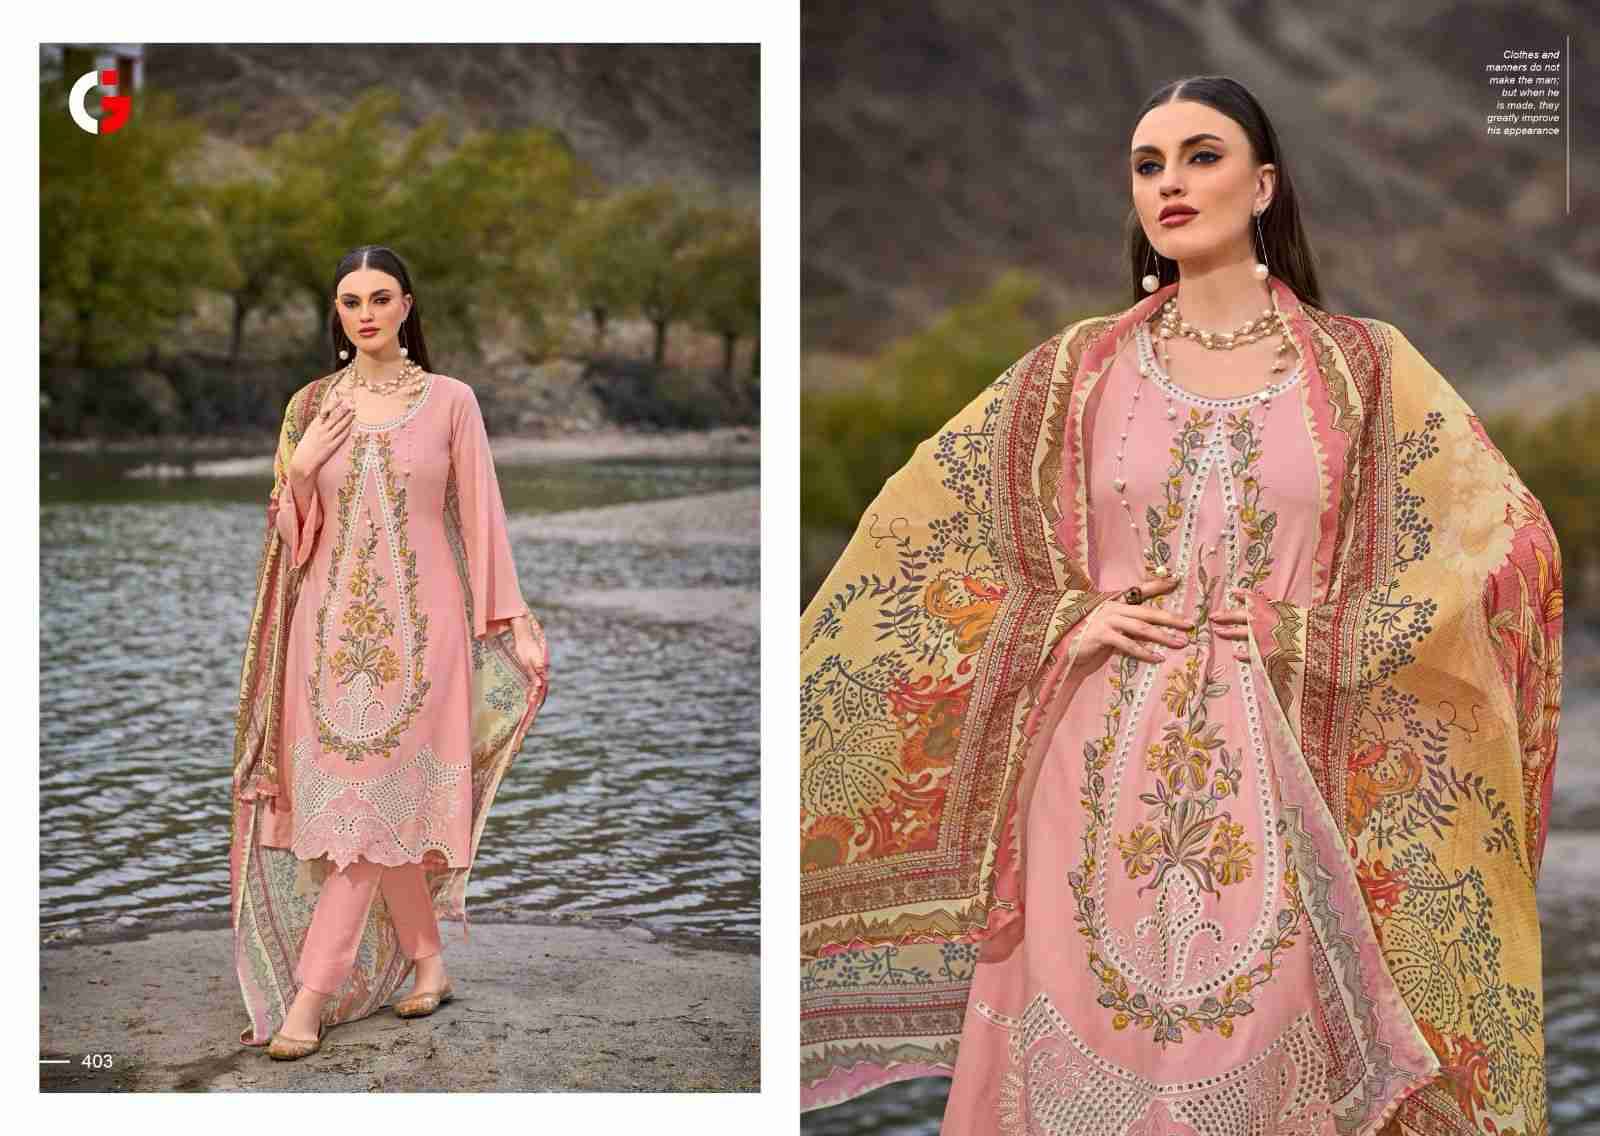 Mehtaab By Gull Jee 401 To 406 Series Beautiful Pakistani Suits Colorful Stylish Fancy Casual Wear & Ethnic Wear Viscose Pashmina Embroidered Dresses At Wholesale Price